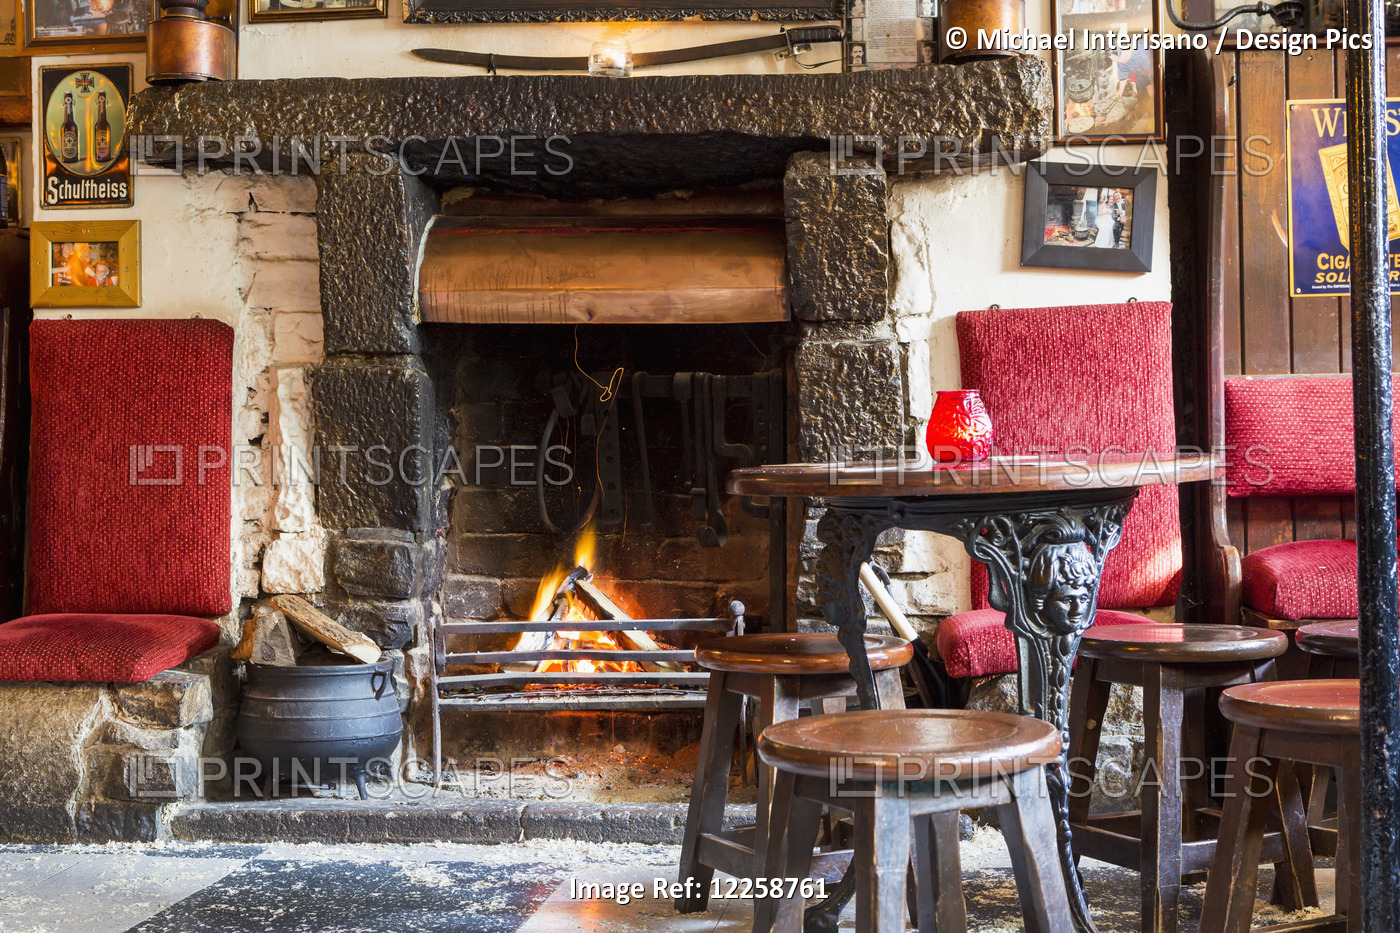 Wood Burning Fireplace With Fire, Old Wooden Stools, And Metal Legged Wooden ...